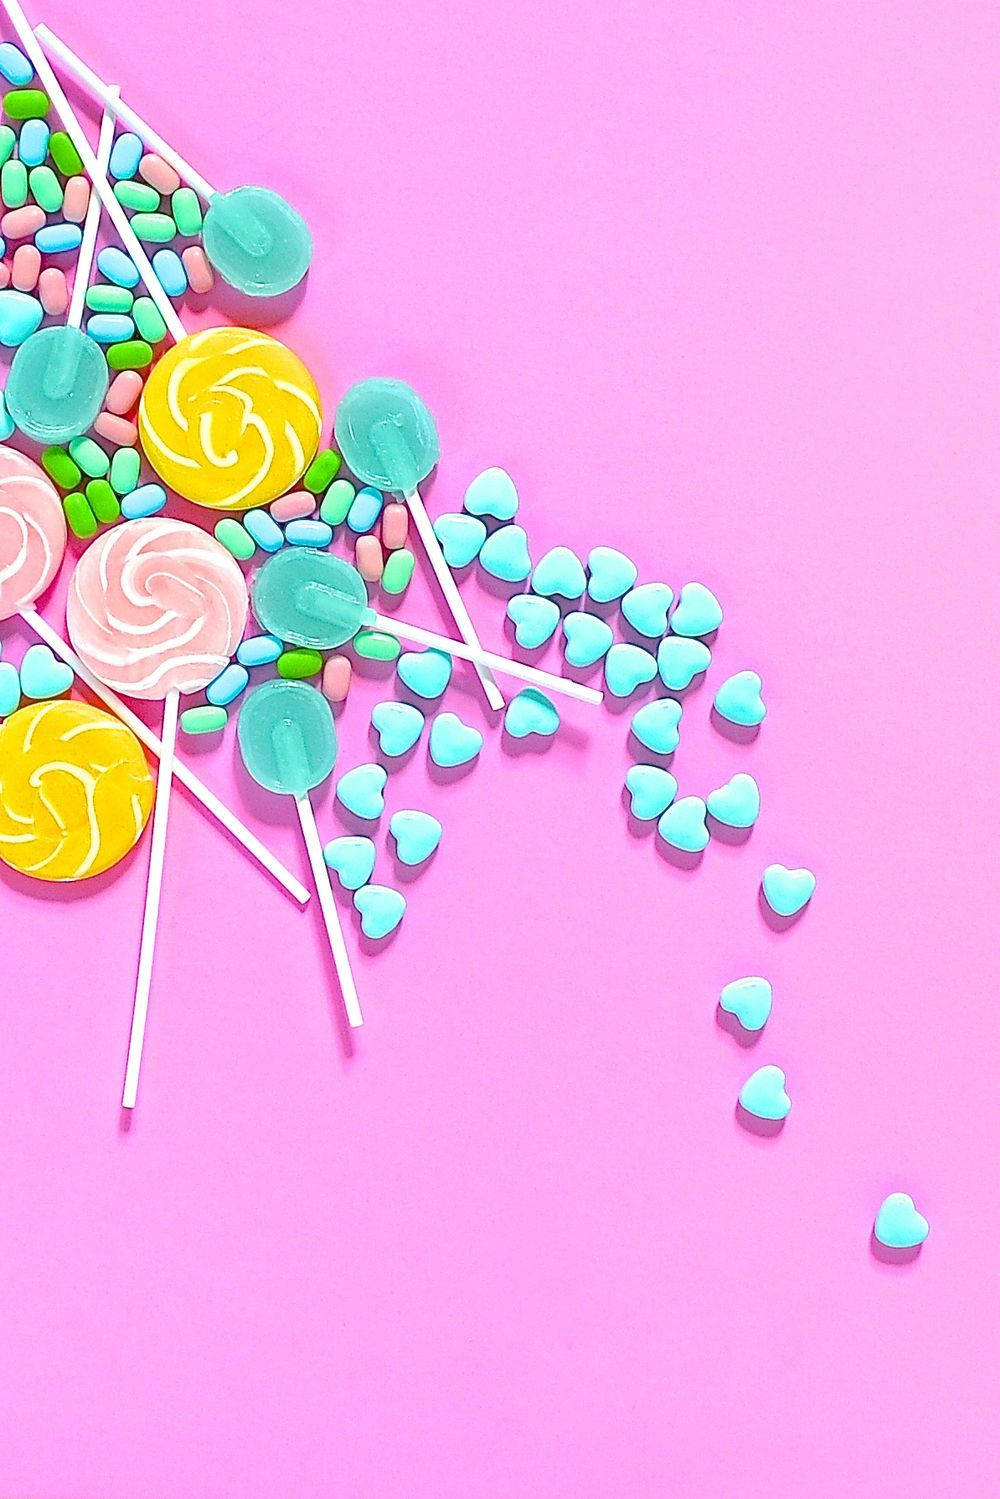 Pastel Aesthetic Candies Background Wallpaper